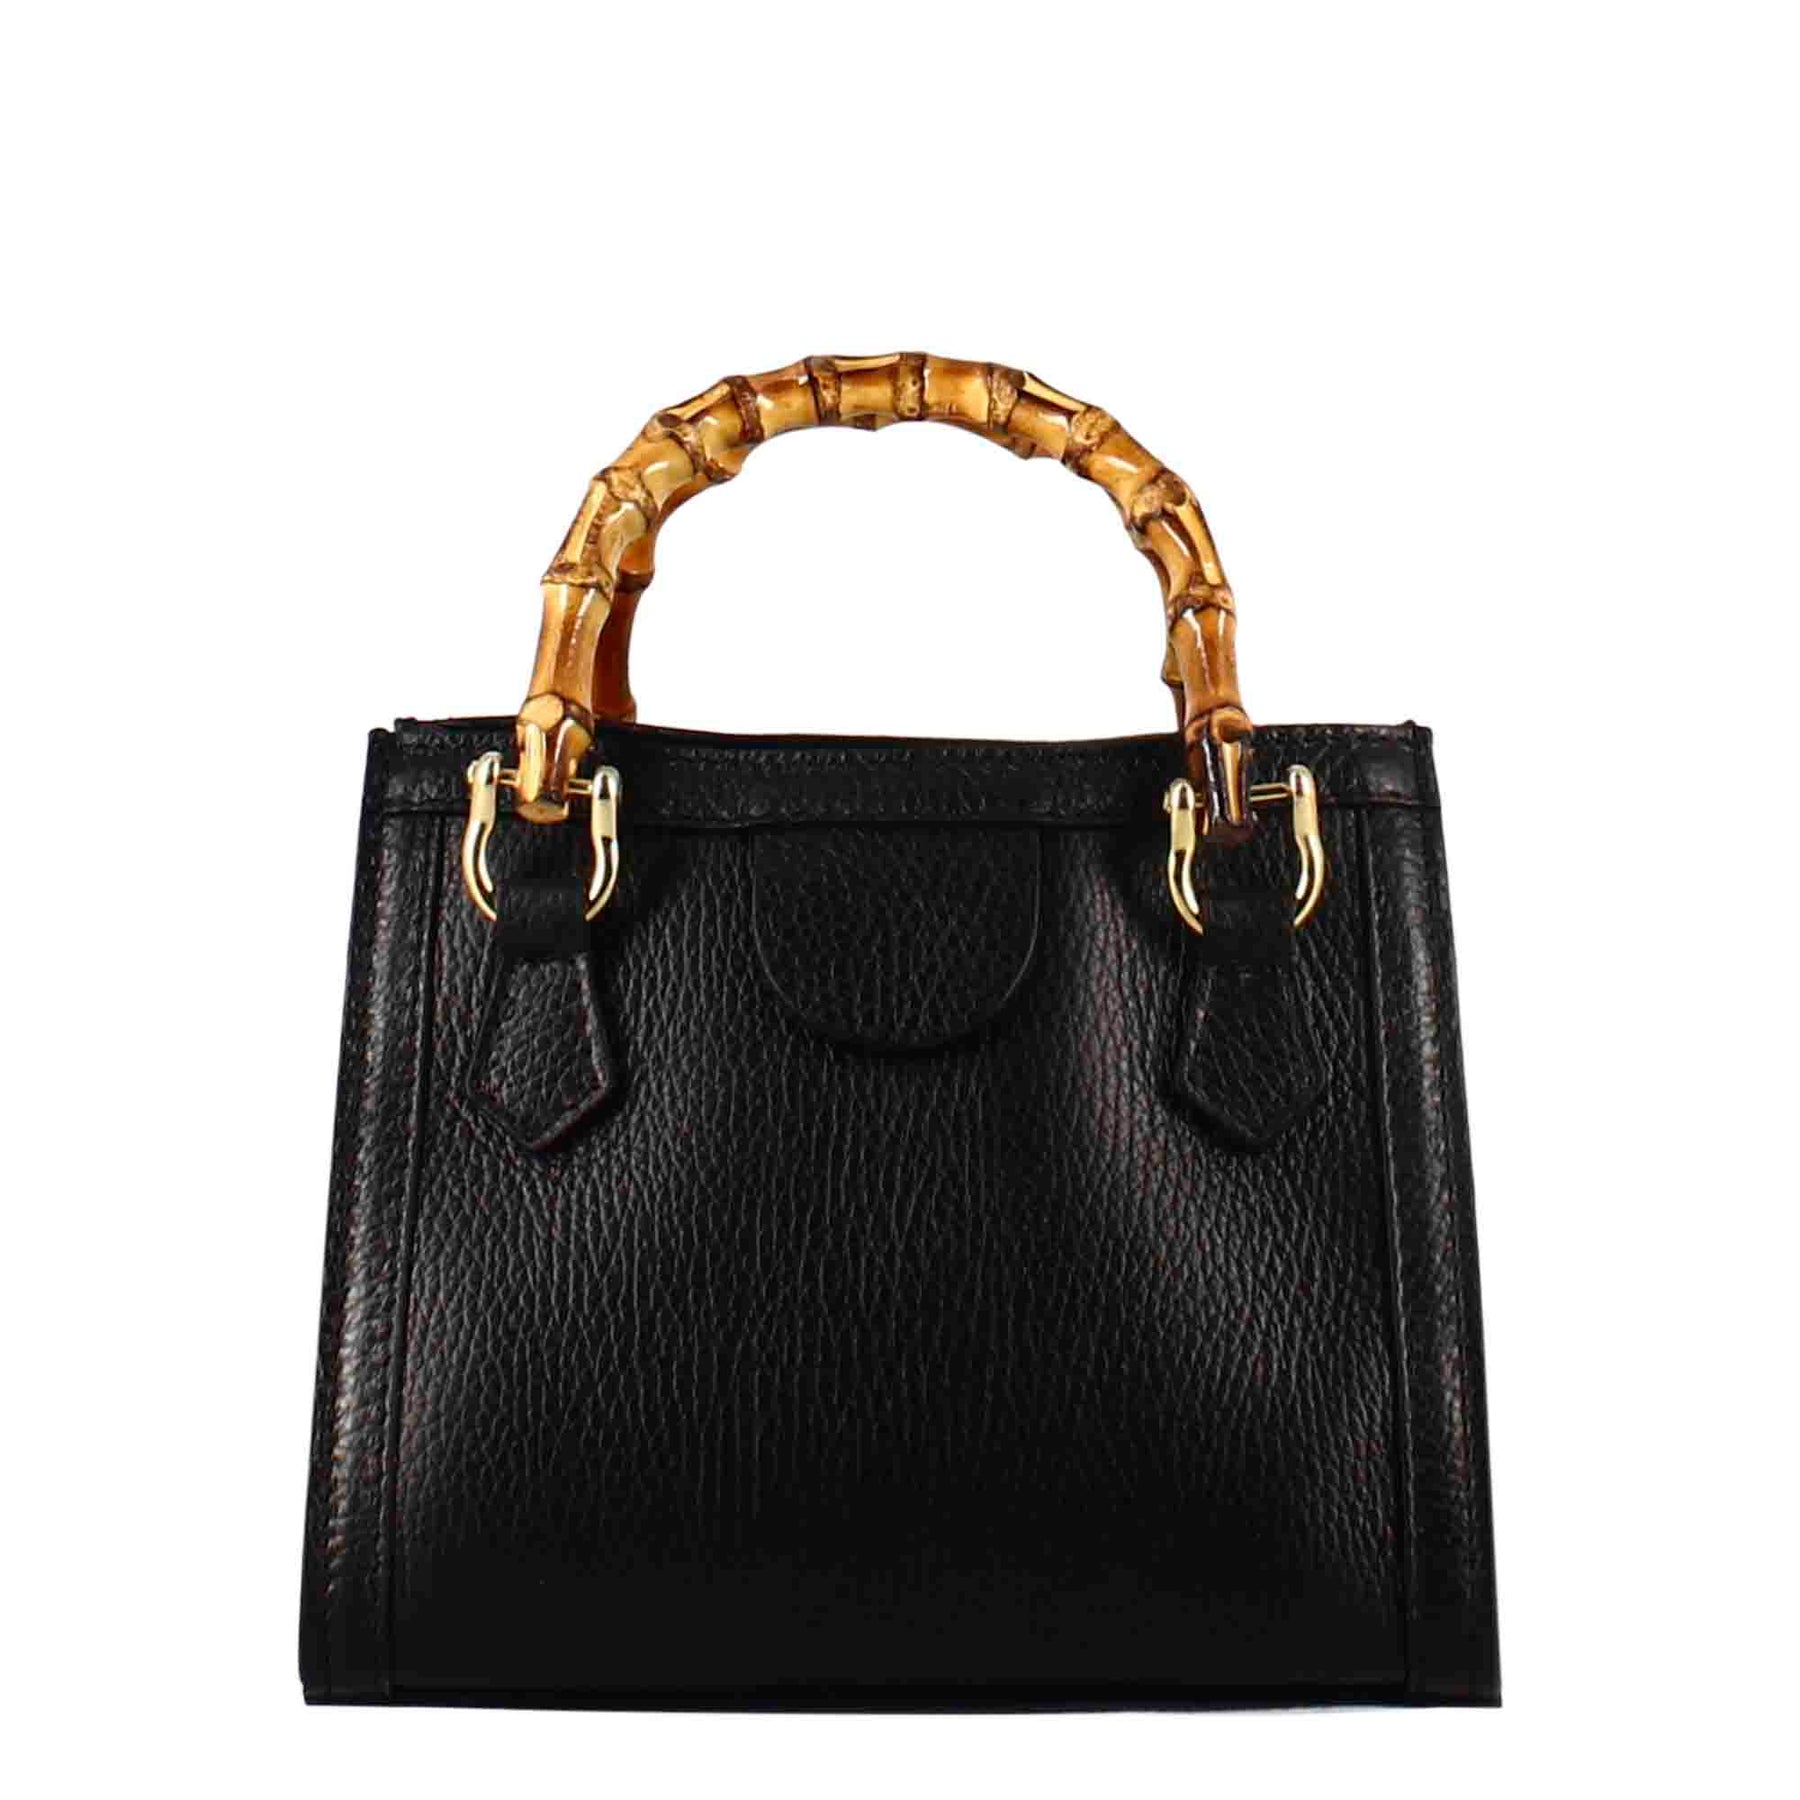 Black leather mini Bamboo handbag for women with wooden handles and shoulder strap